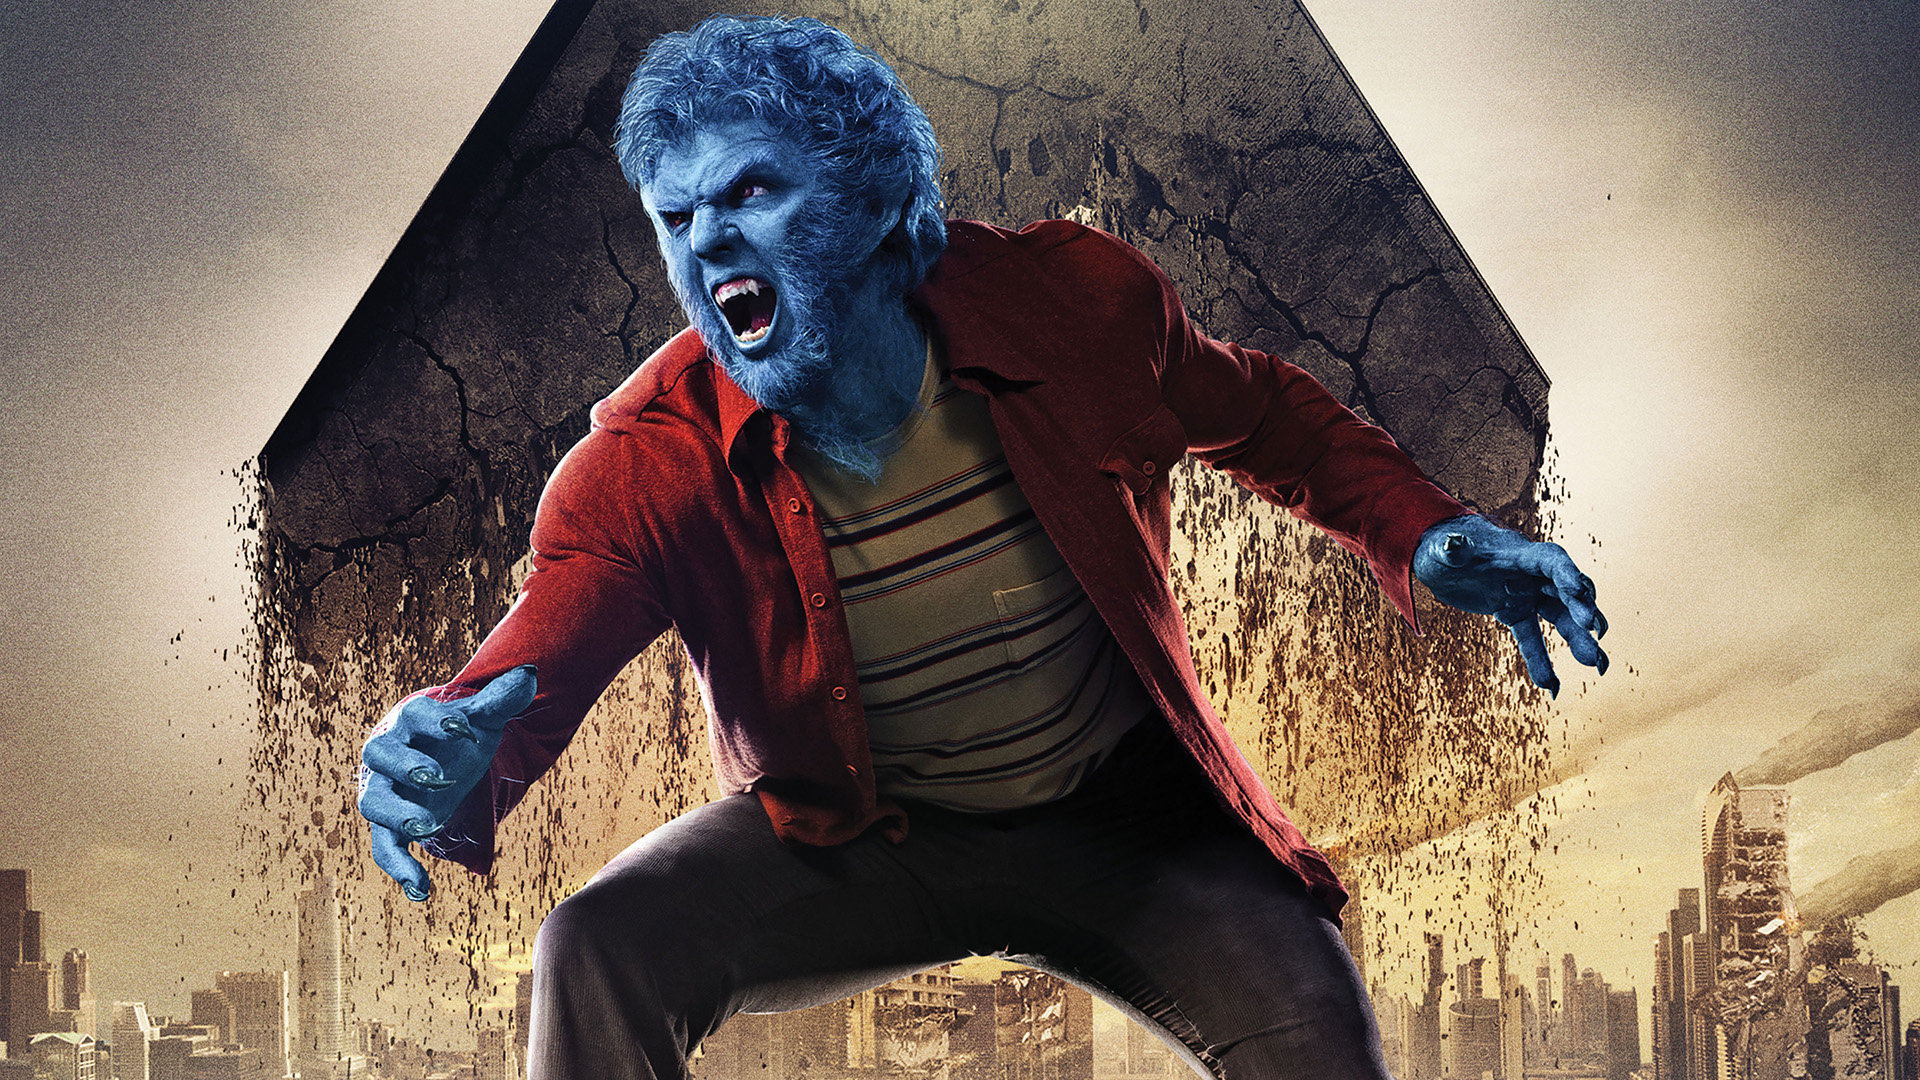 Download 1080p X-Men: Days Of Future Past PC wallpaper ID:8442 for free